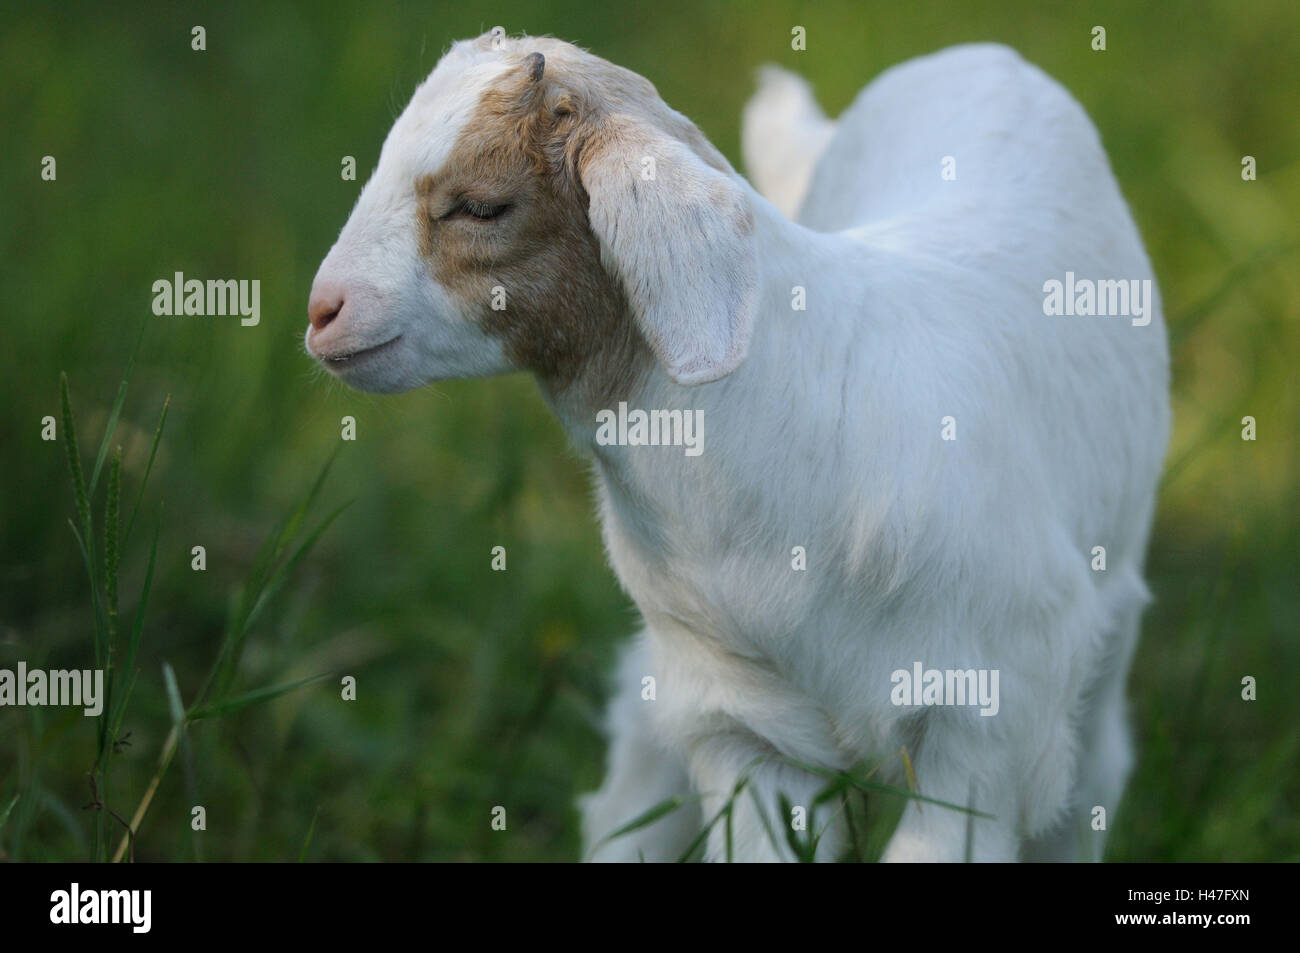 Boer goat, young animal, meadow, front view, standing, Stock Photo